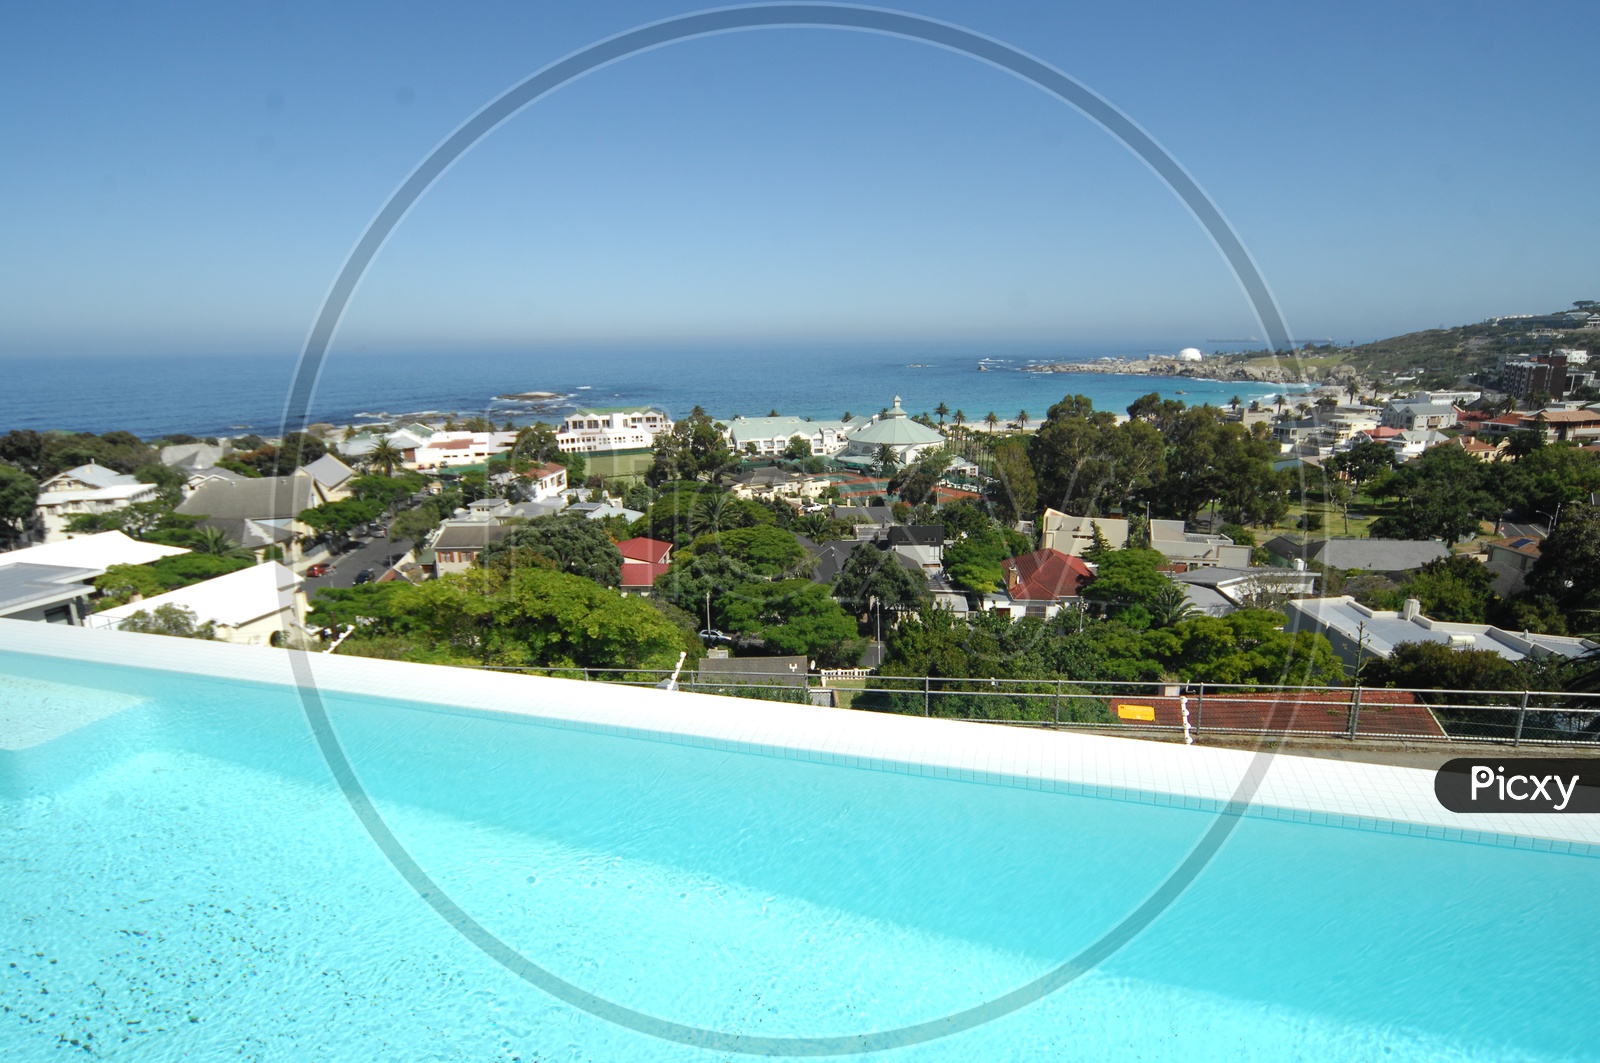 A pool with view view of Capetown